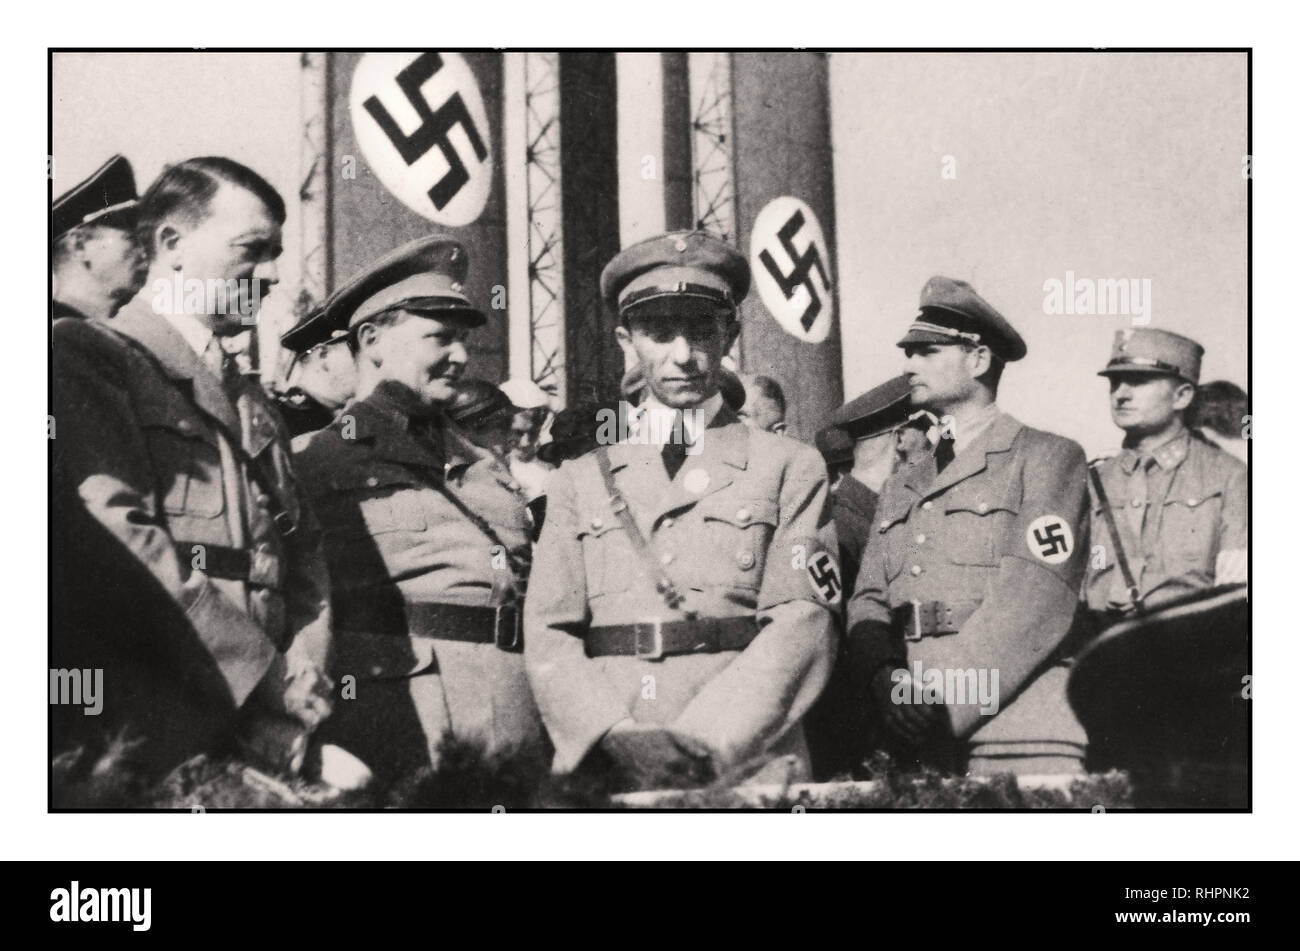 Nazi leaders leadership at Nazi Party Rally in the 1930s. L-R: Adolf Hitler; Herman Goering, Joseph Goebbels, Rudolph Hess. Rare Pre-War image of the infamous group of top Nazi architects of the Night of the Long Knives:  Only Himmler and Heydrich are absent. Stock Photo